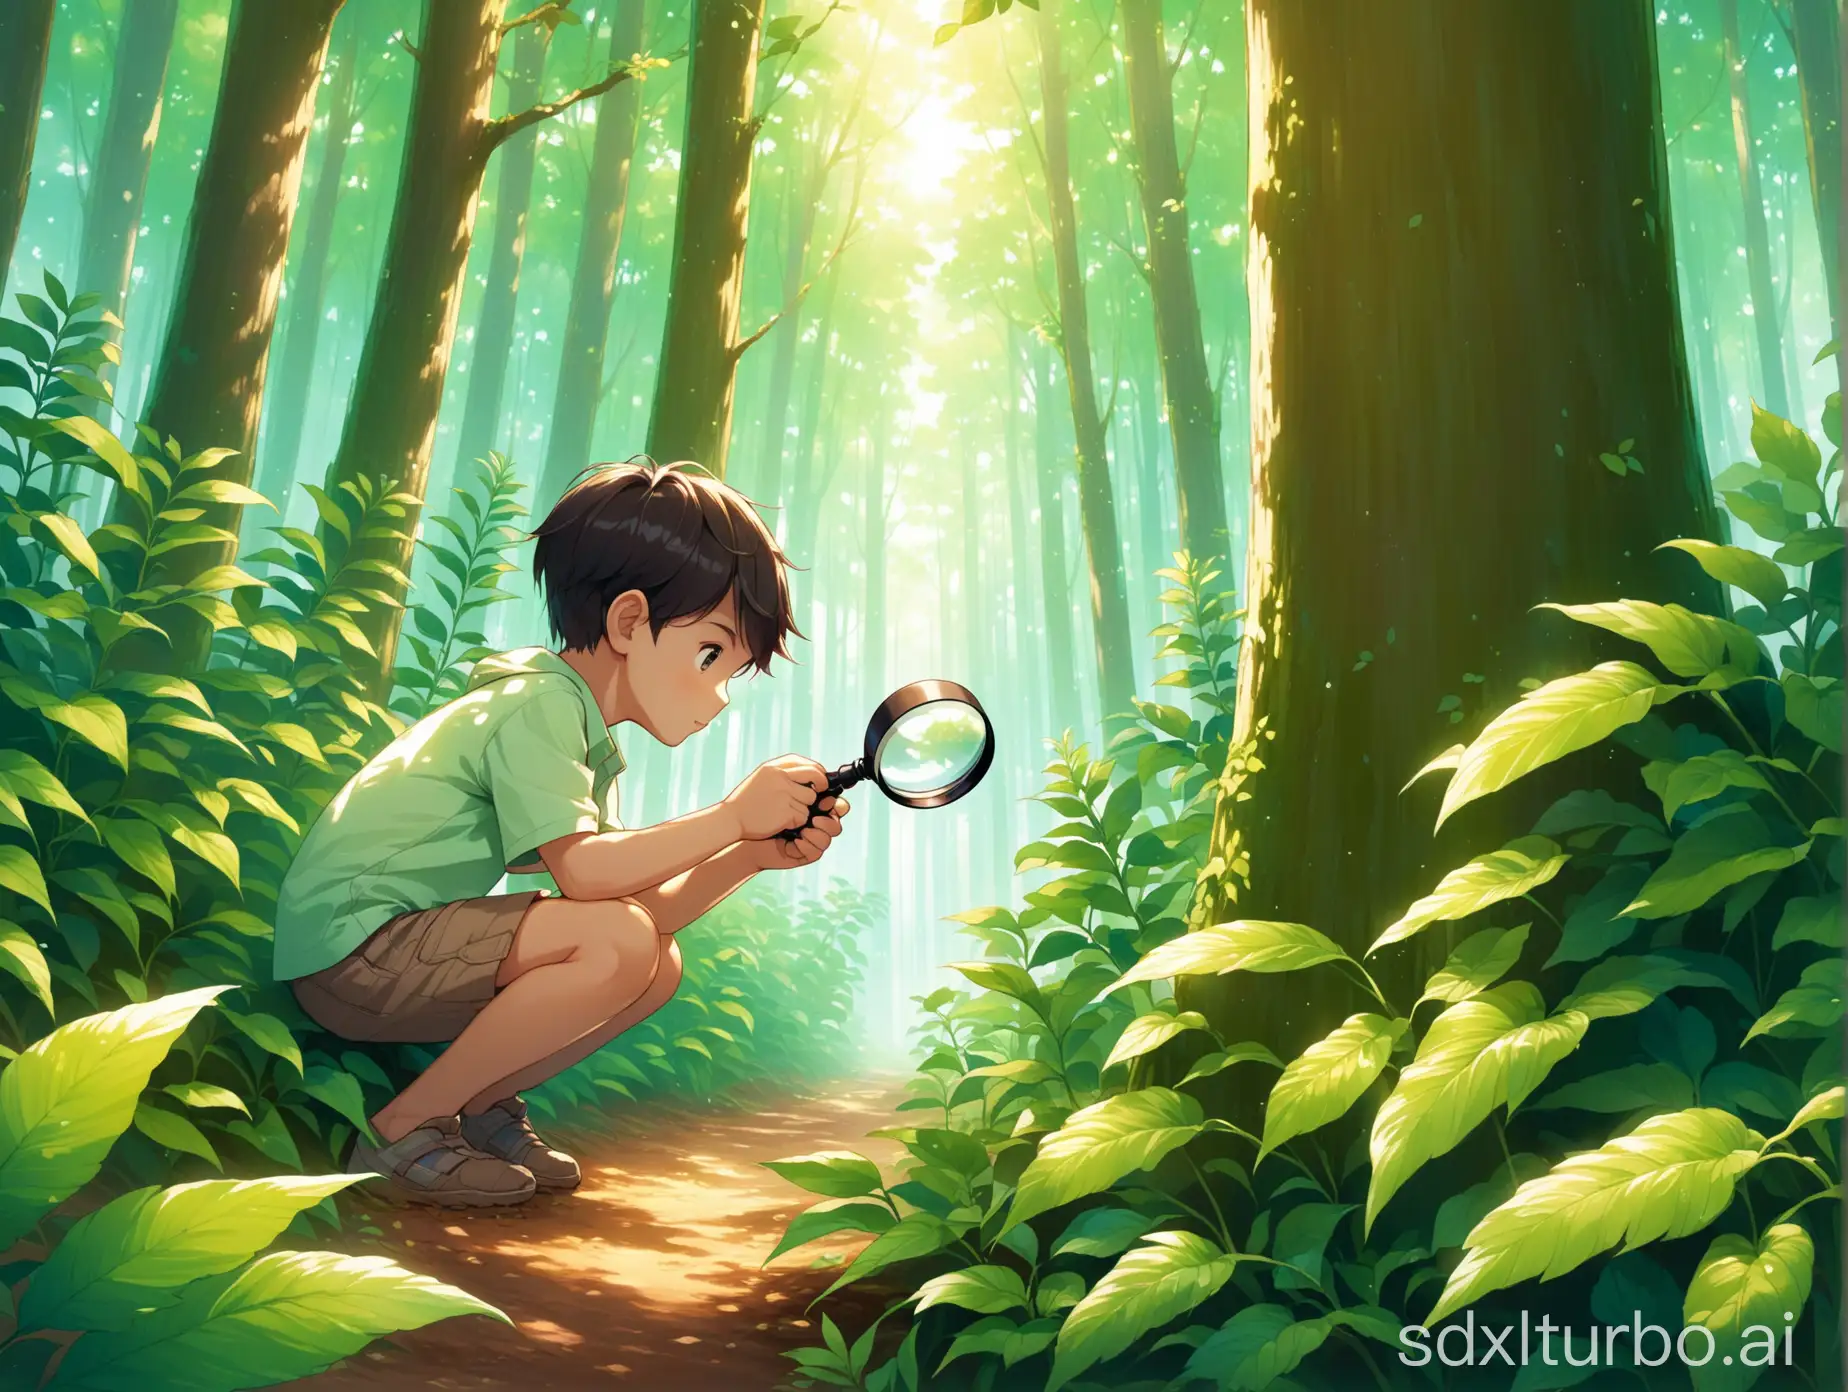 A photo of a forest, with a young boy holding a magnifying glass observing plants.